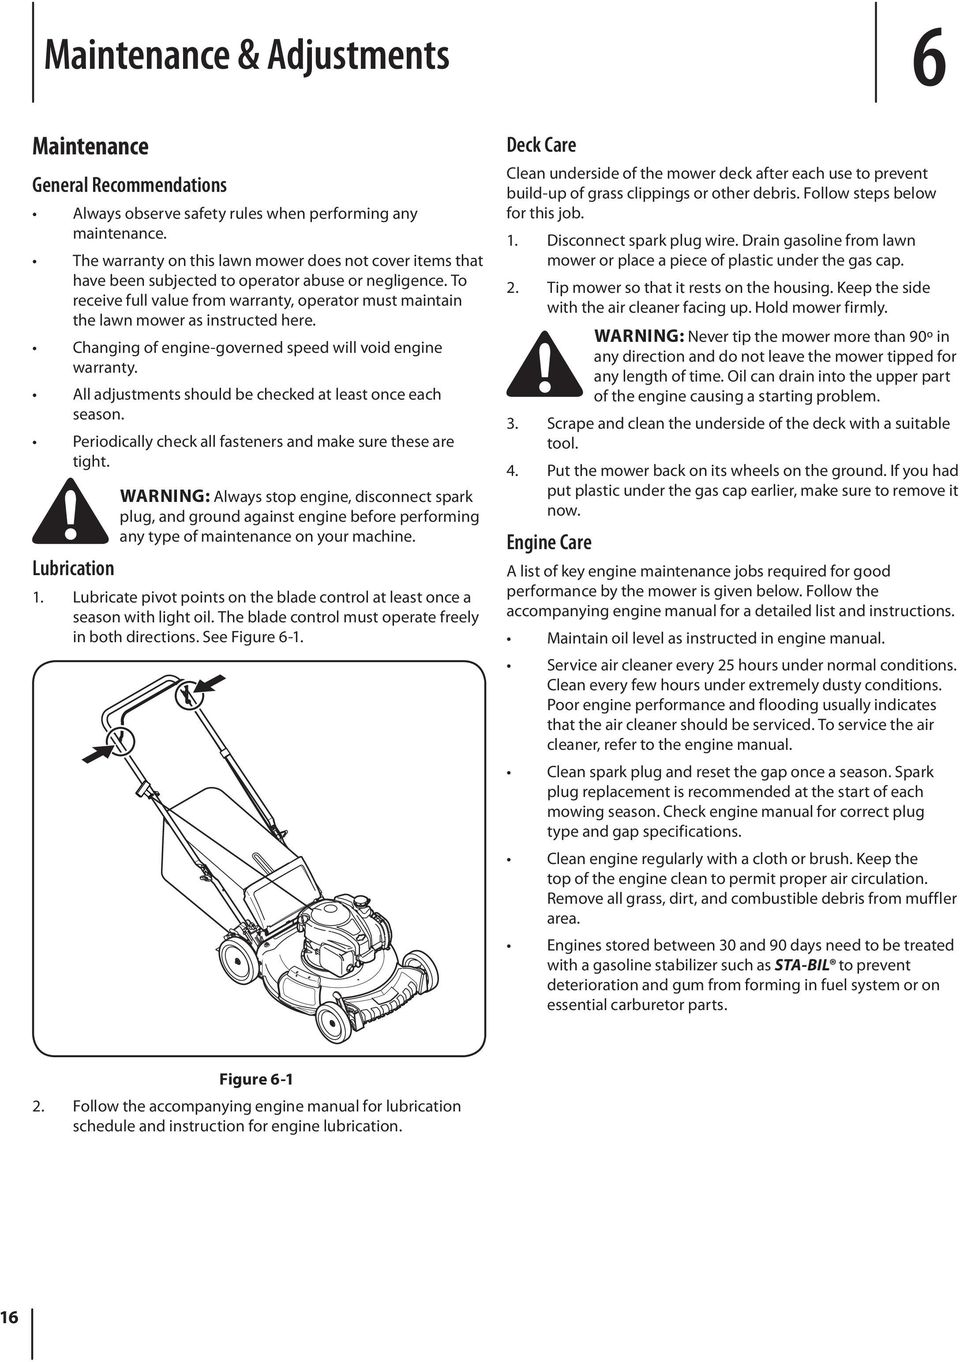 To receive full value from warranty, operator must maintain the lawn mower as instructed here. Changing of engine-governed speed will void engine warranty.